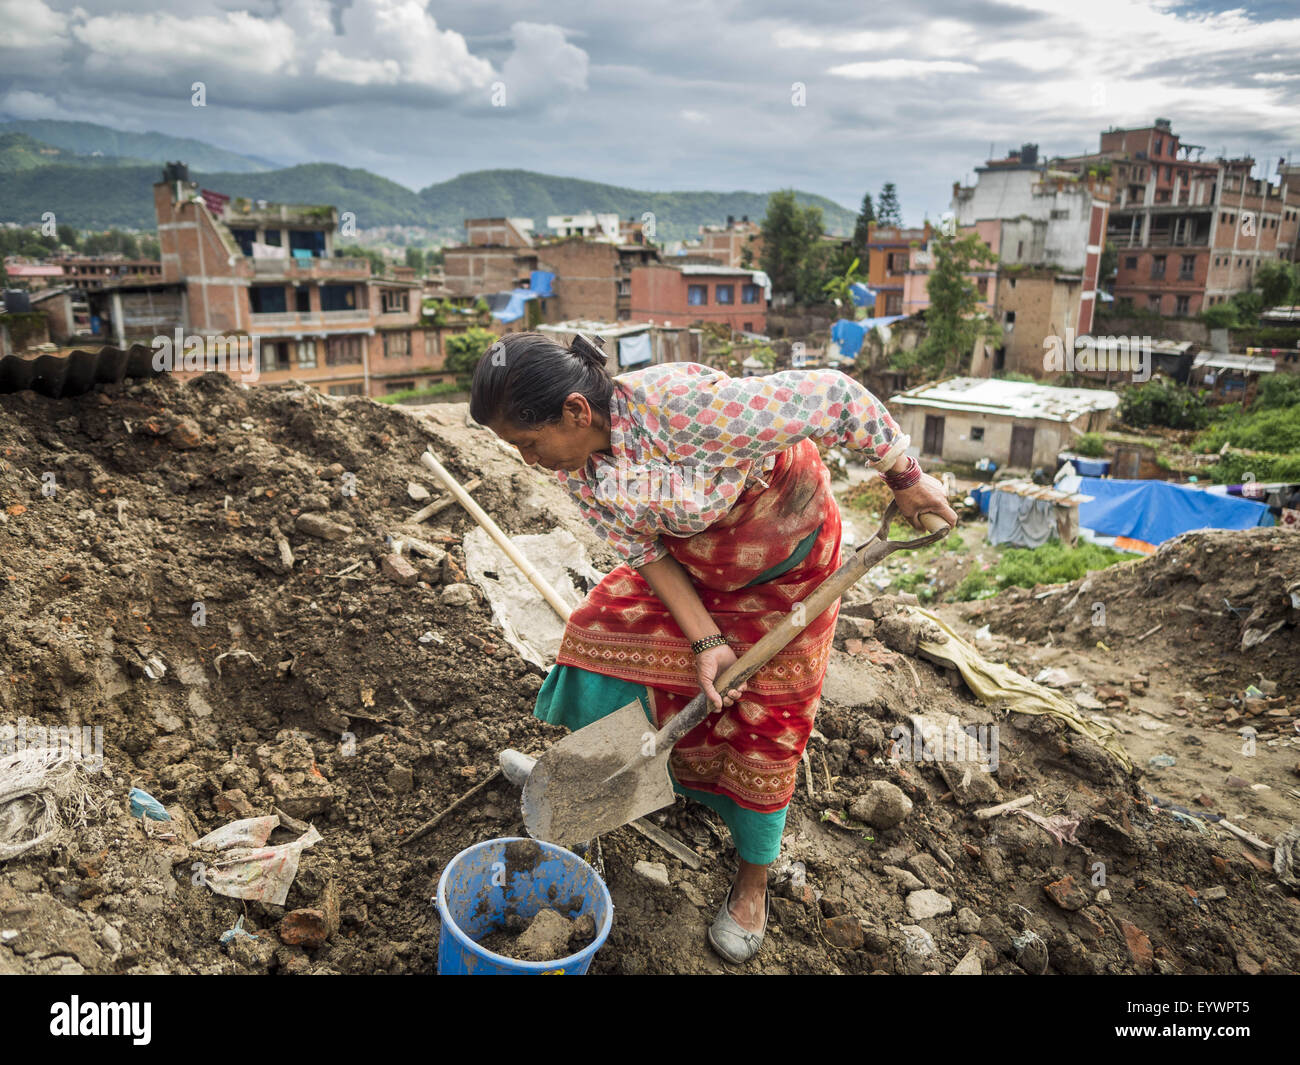 Bhaktapur, Central Region, Nepal. 2nd Aug, 2015. A woman digs up dirt for her temporary shelter in a small Internal Displaced Person (IDP) camp in Bhaktapur. Bhaktapur was badly damaged in the earthquake the hit Nepal in April 2015. The Nepal Earthquake on April 25, 2015, (also known as the Gorkha earthquake) killed more than 9,000 people and injured more than 23,000. It had a magnitude of 7.8. © ZUMA Press, Inc./Alamy Live News Stock Photo